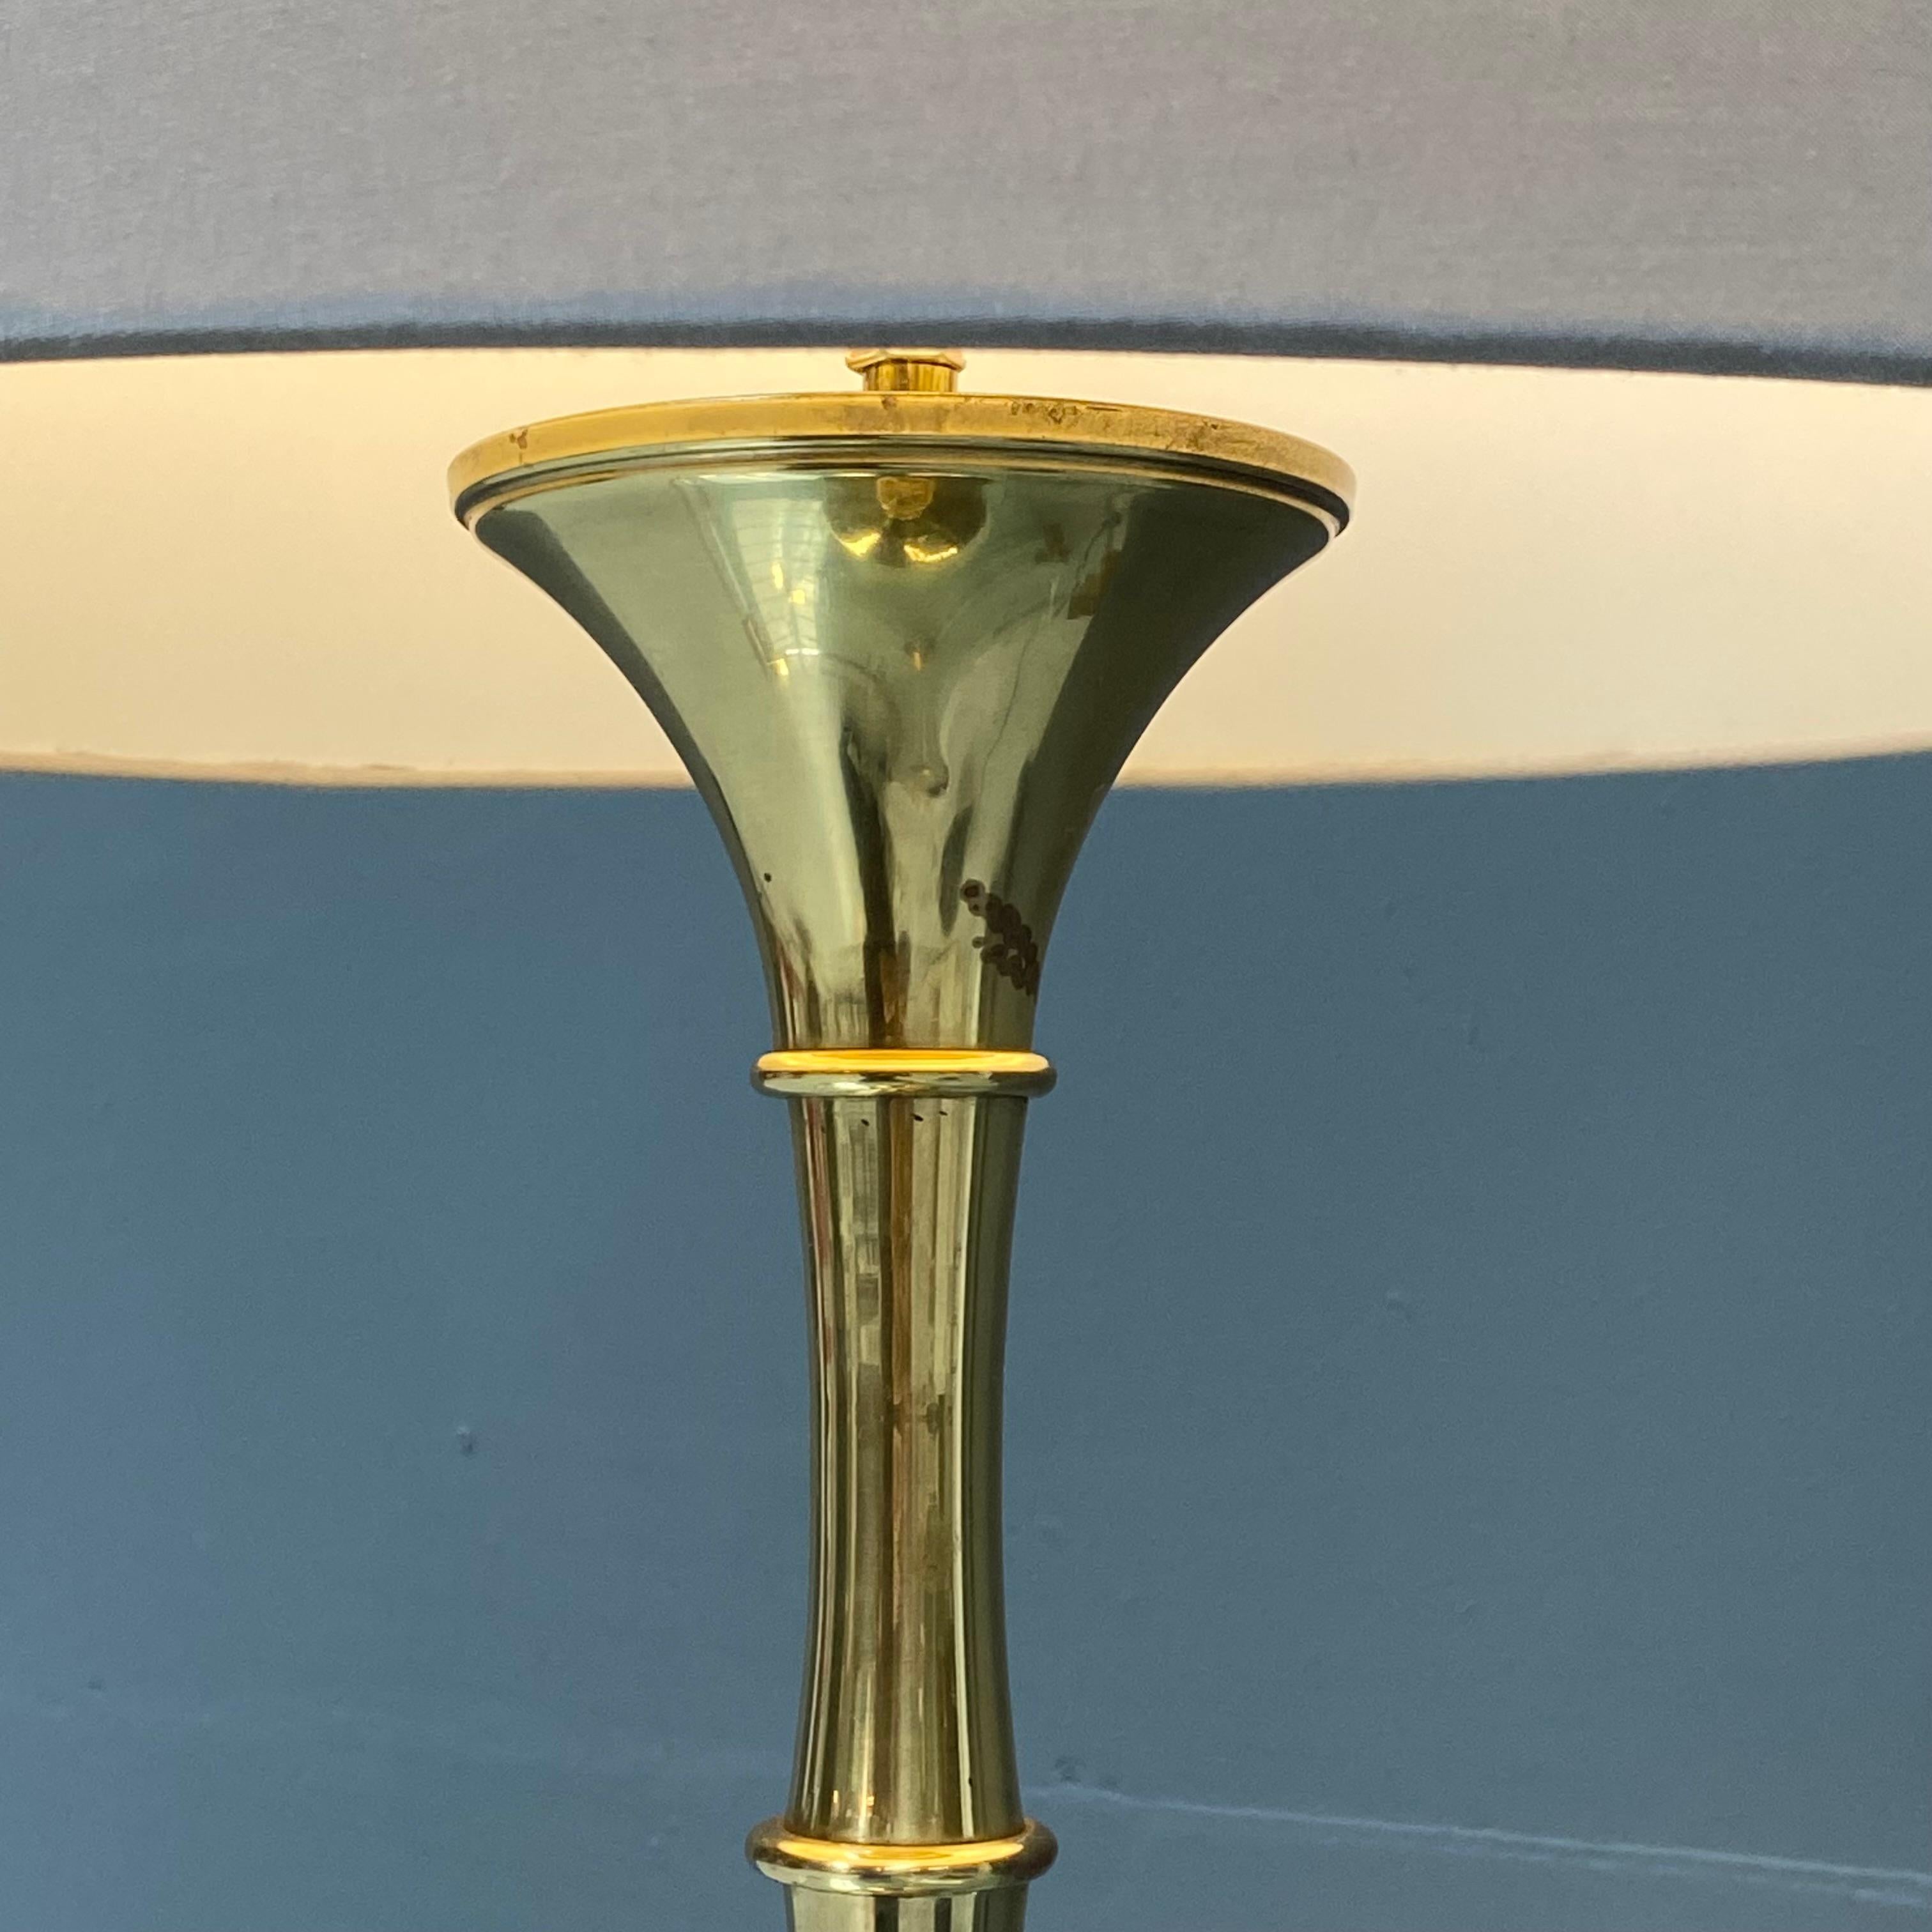 Hollywood Regency Vintage Bamboo Table Lamp in Brass by Ingo Maurer for M Design, 1960s. For Sale